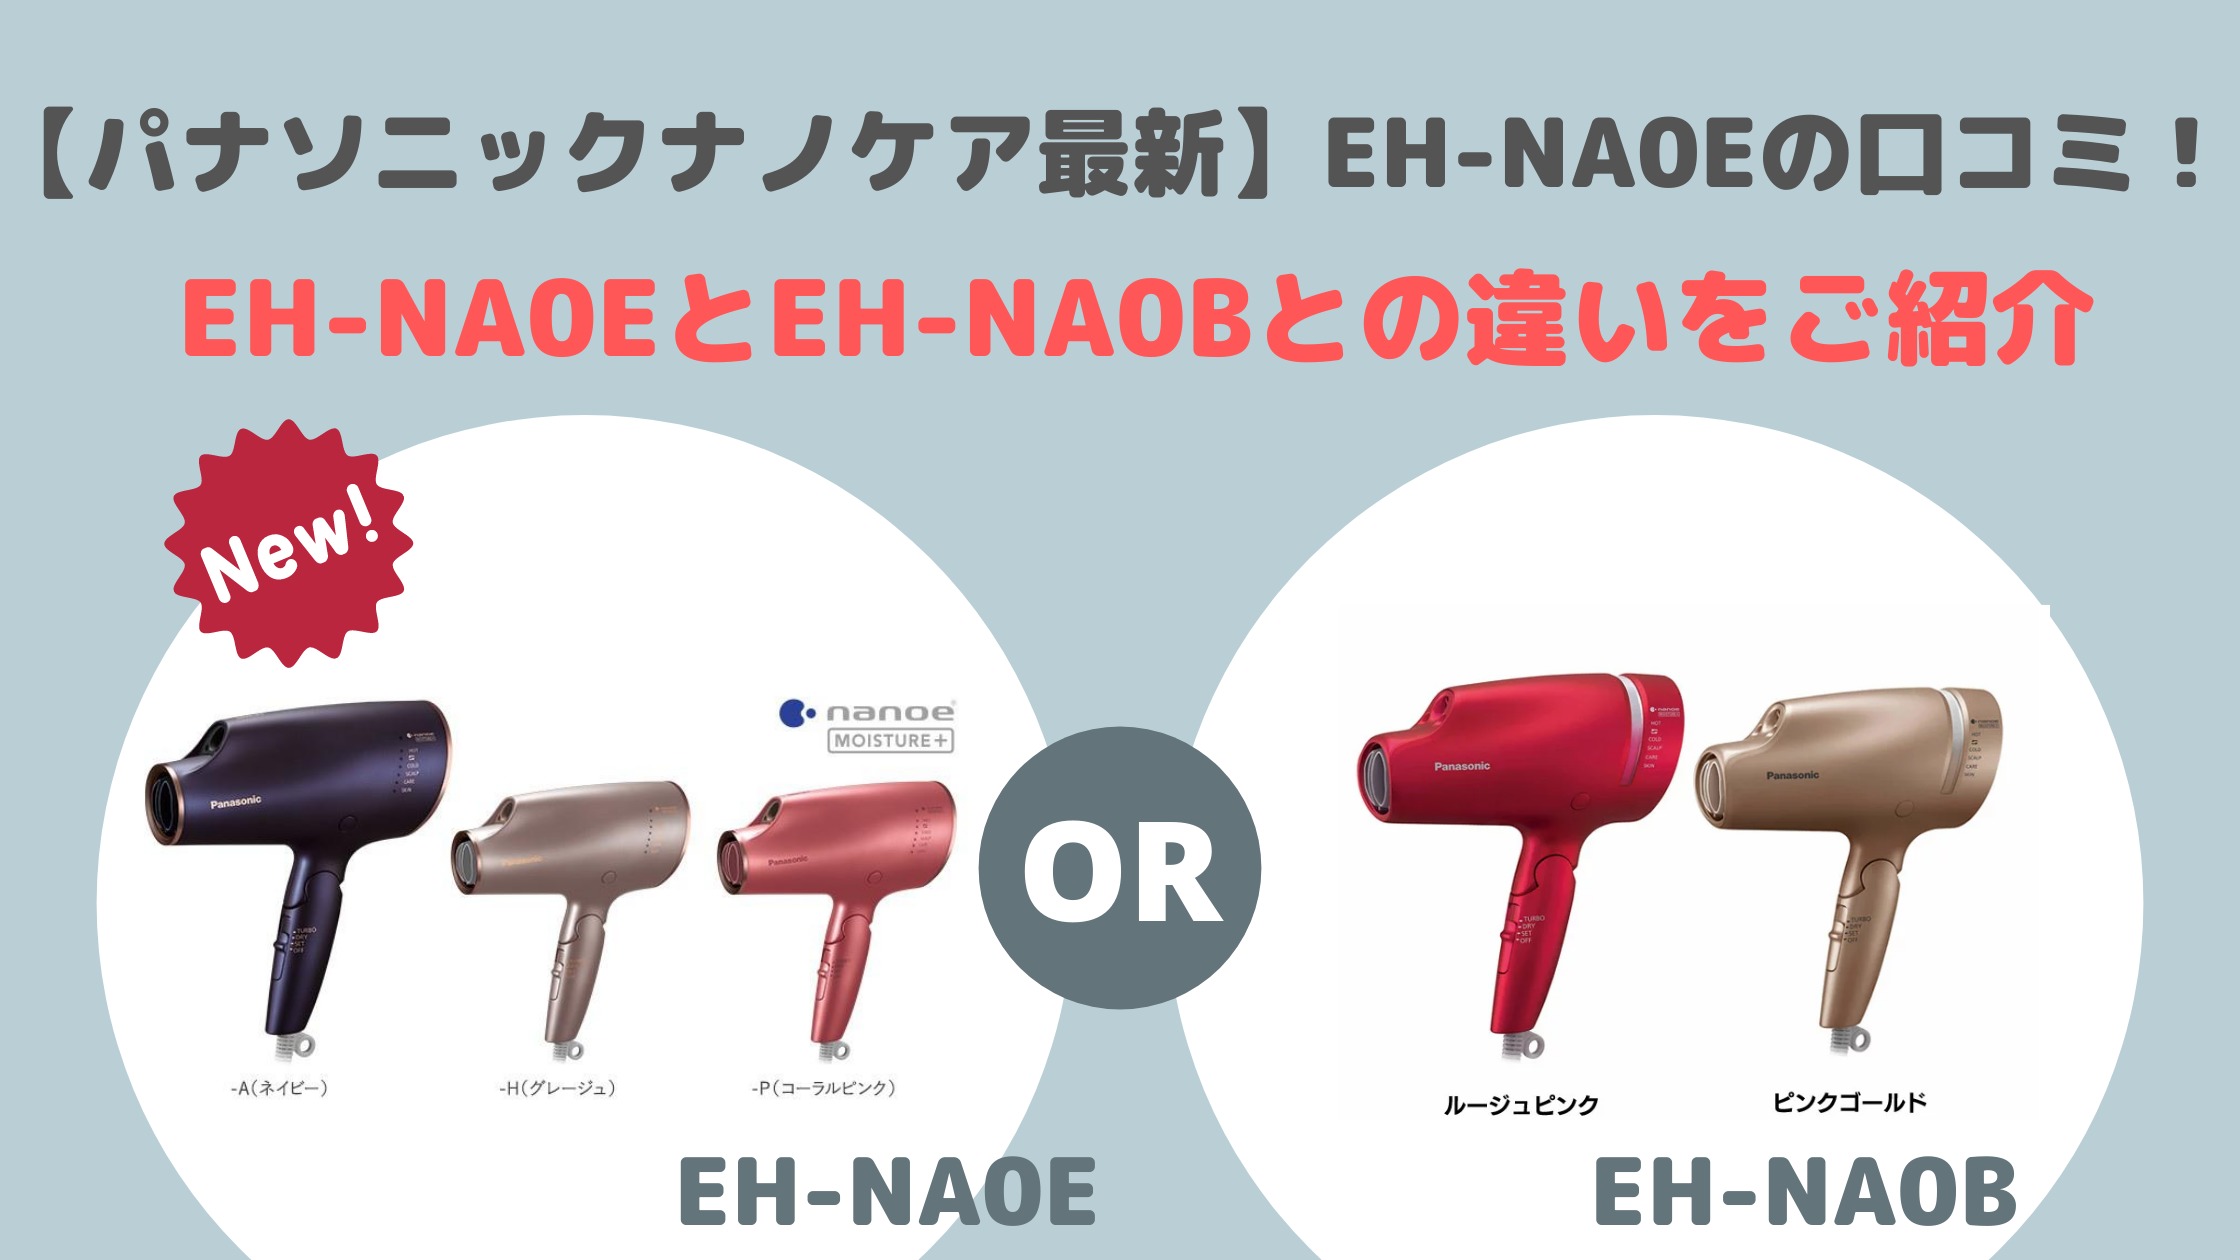 EH-NA0E口コミ！EH-NA0EとEH-NA0Bとの違いをご紹介｜パナソニック 